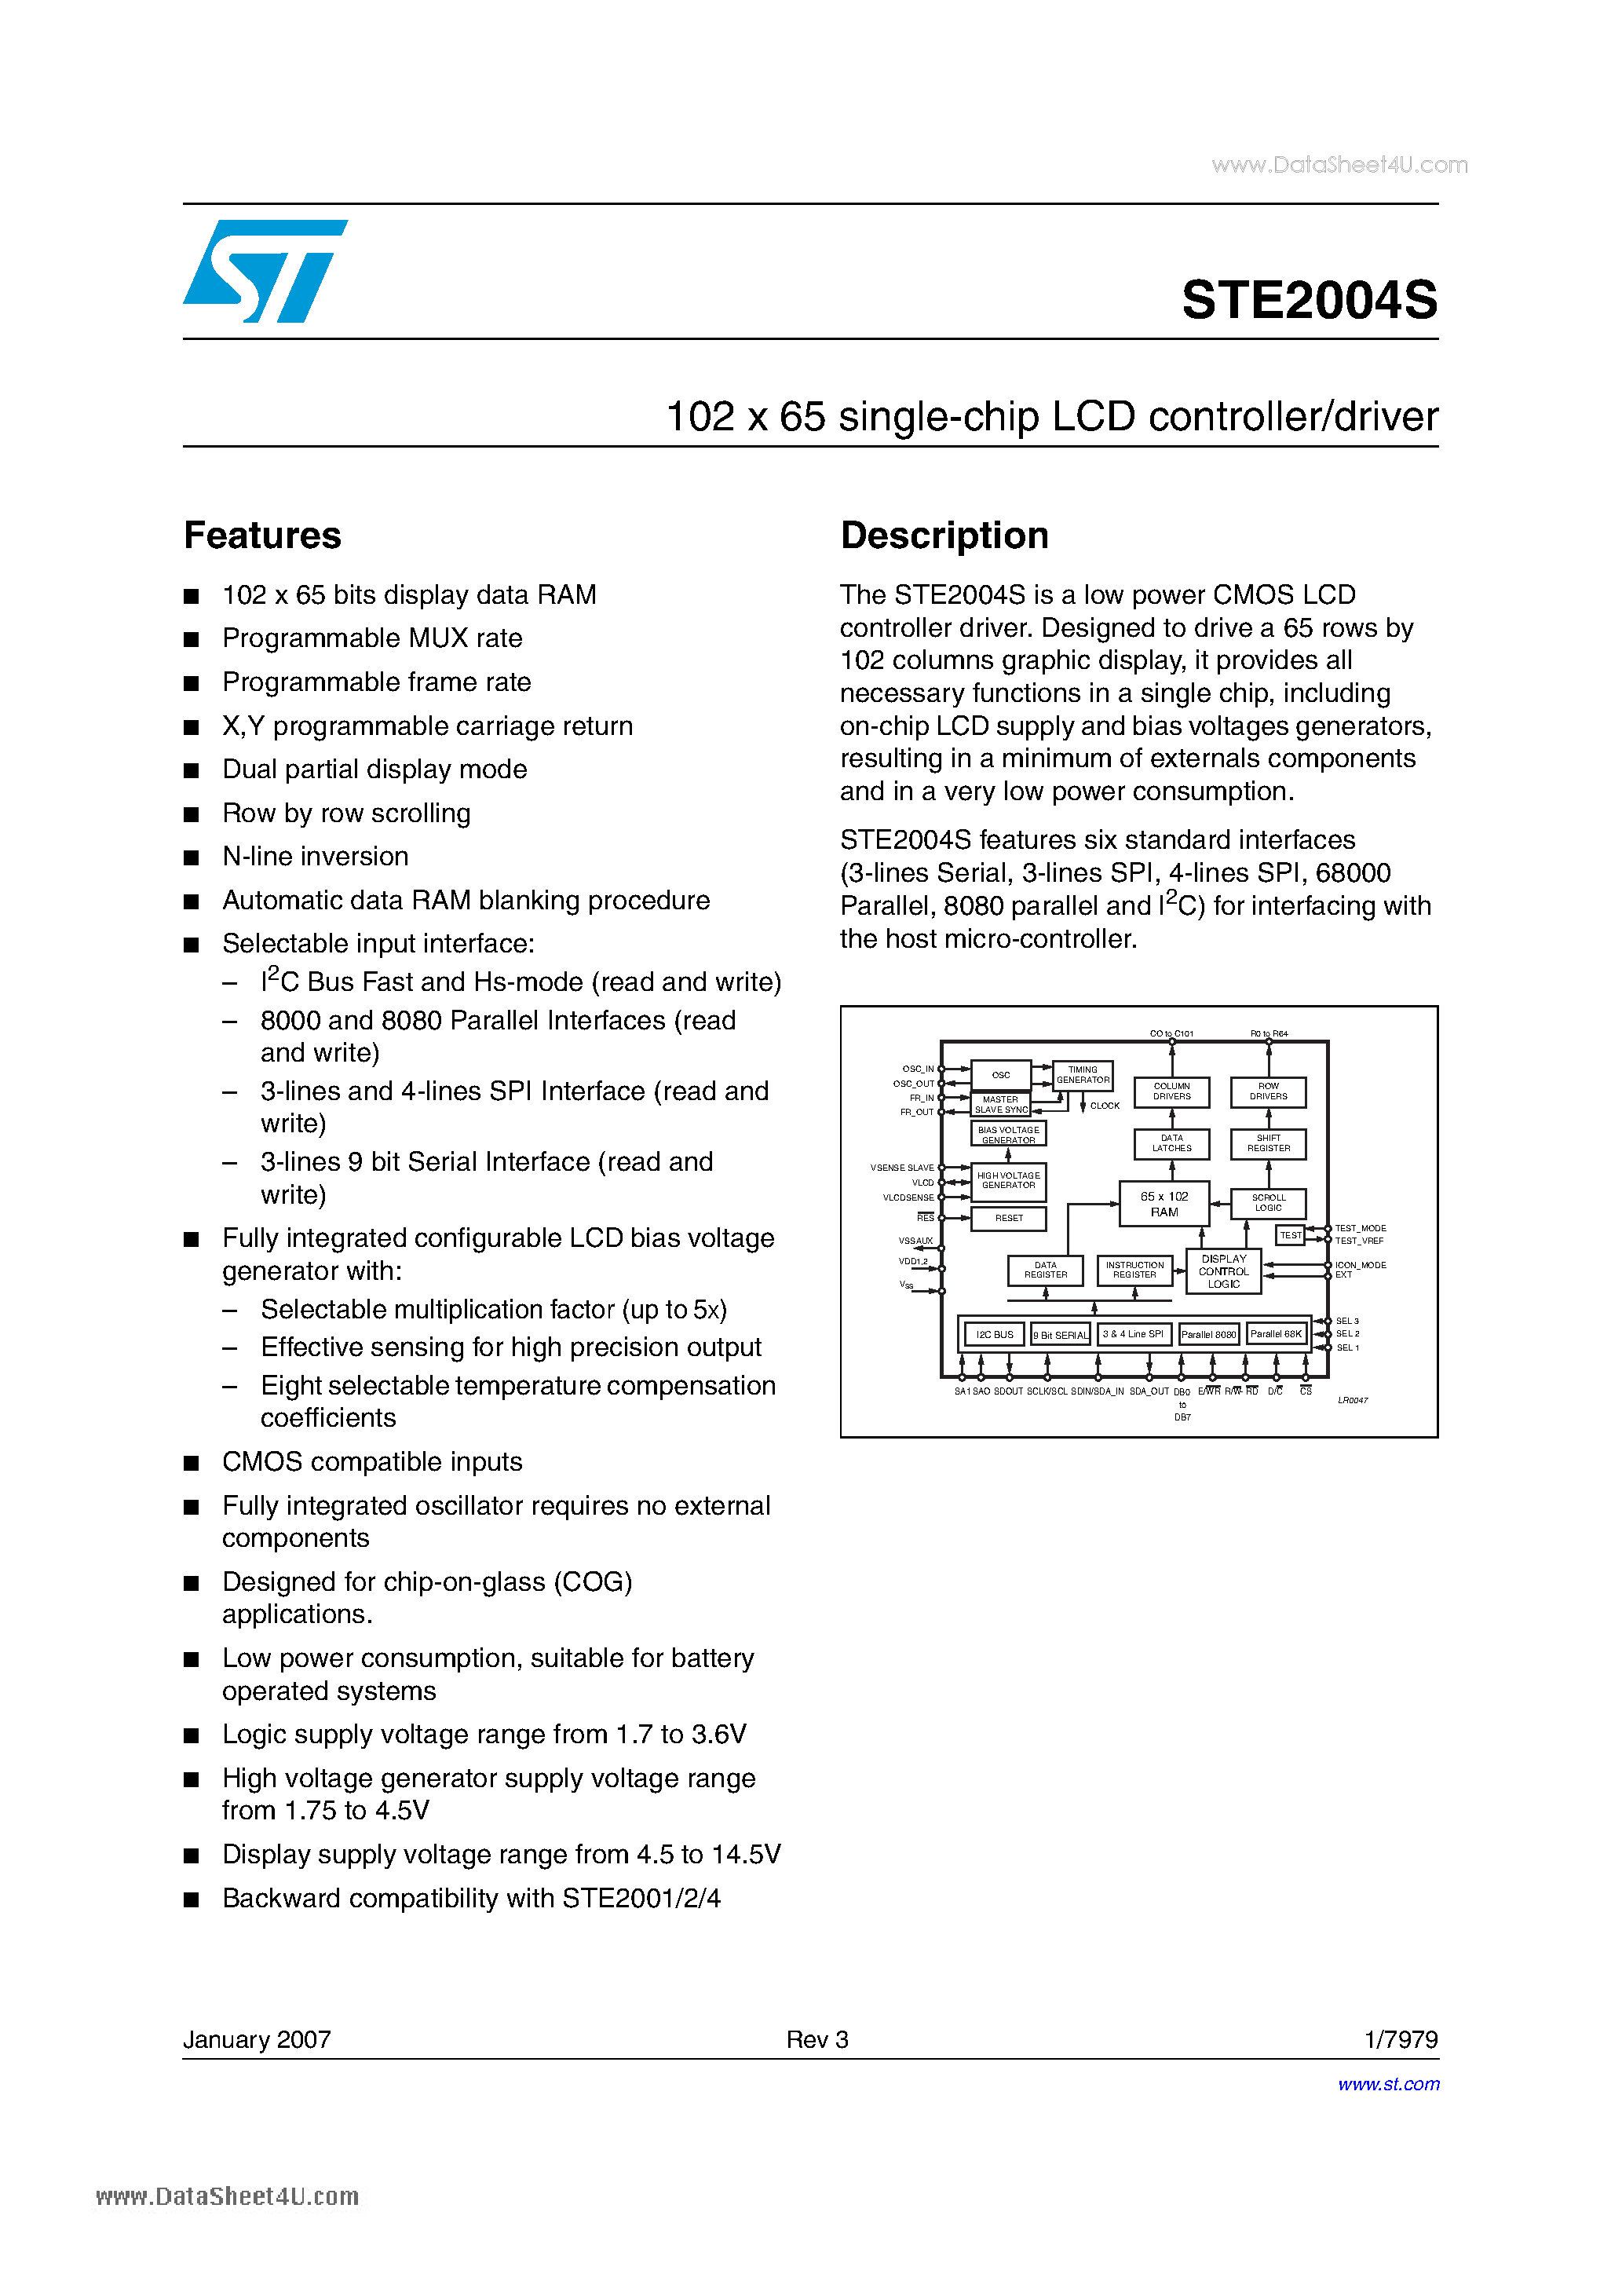 Datasheet STE2004S - 102 X 65 single-chip LCD controller/driver page 1